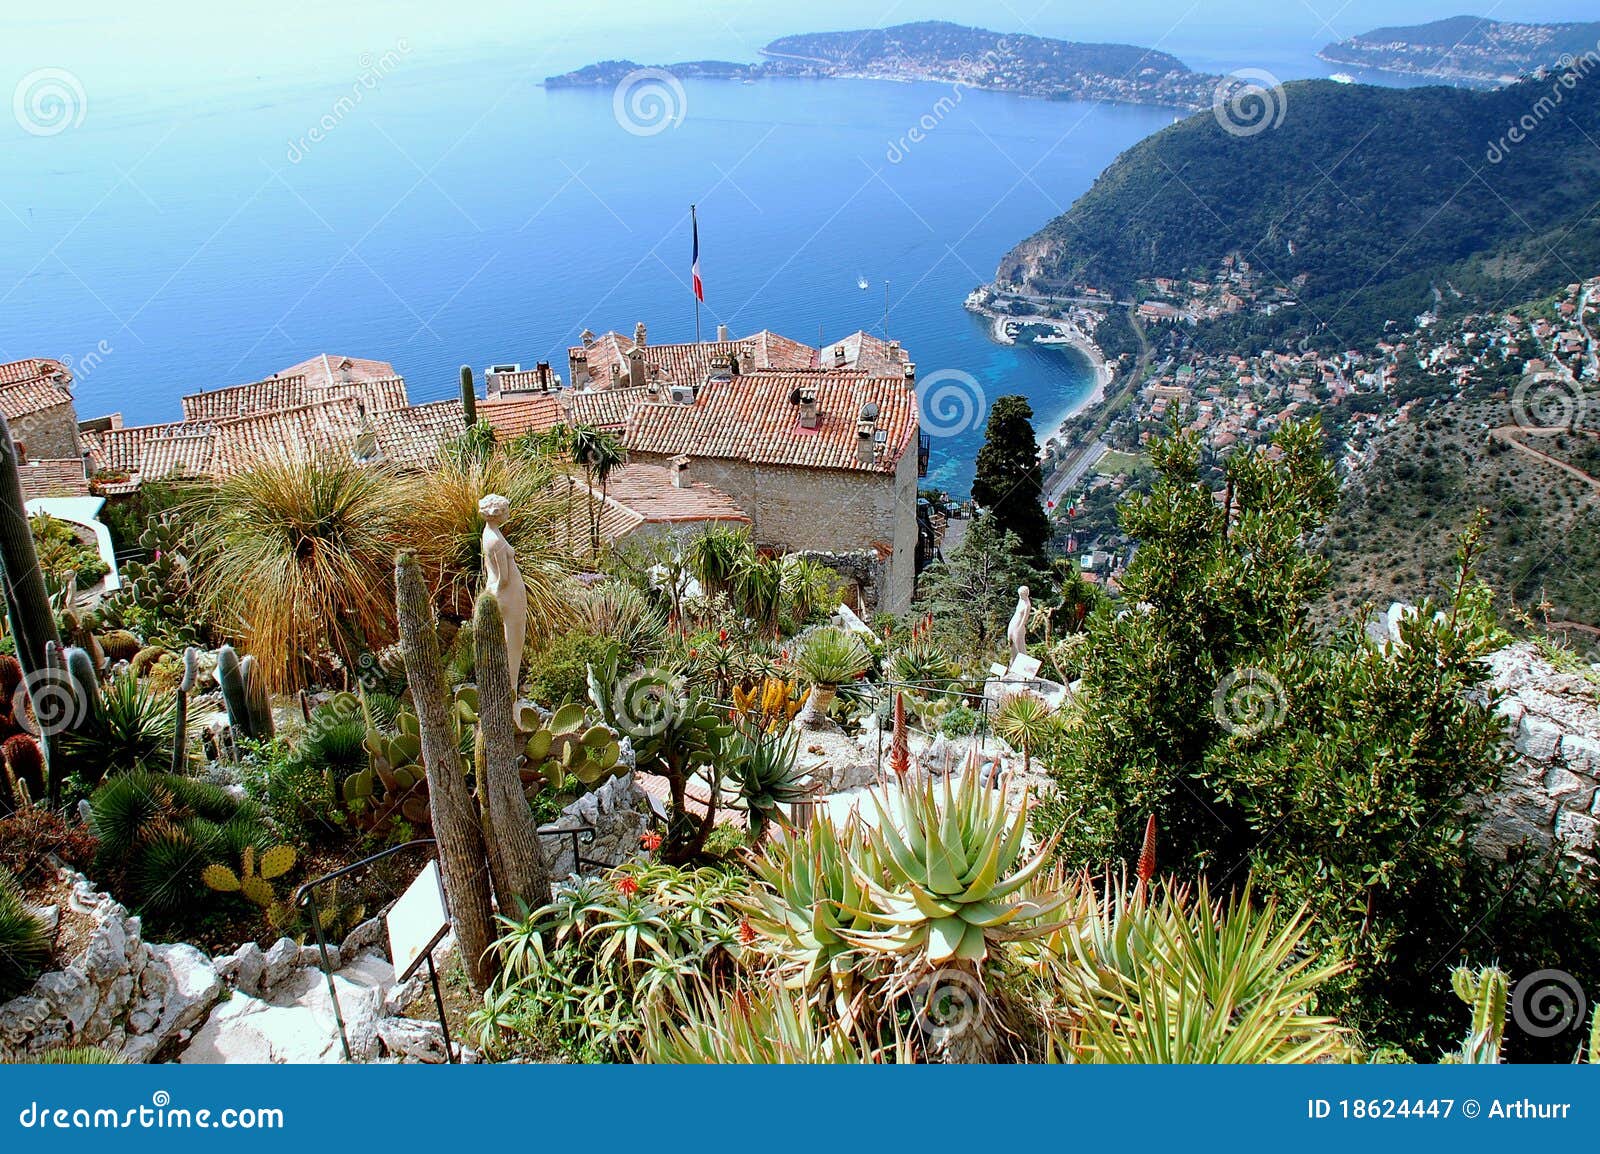 Eze, Franse Riviera stock afbeelding. Image of rots, overzees - 18624447